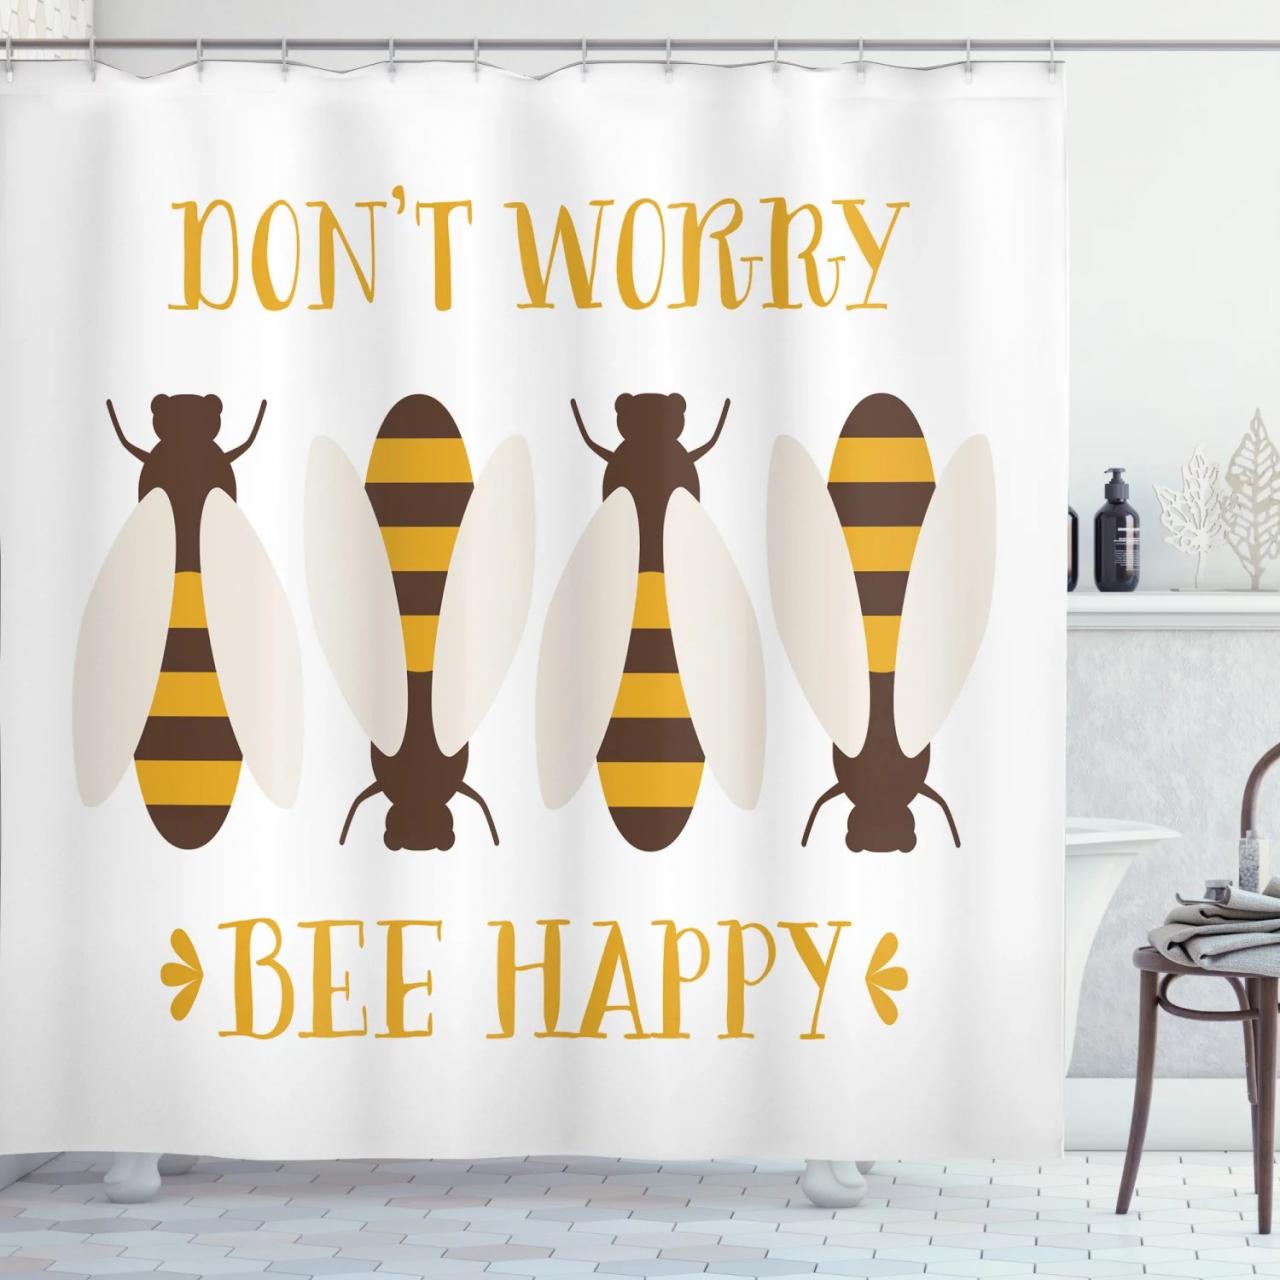 Honey Bee Shower Curtain, Don't Worry Bee Happy Humorous Calligraphy